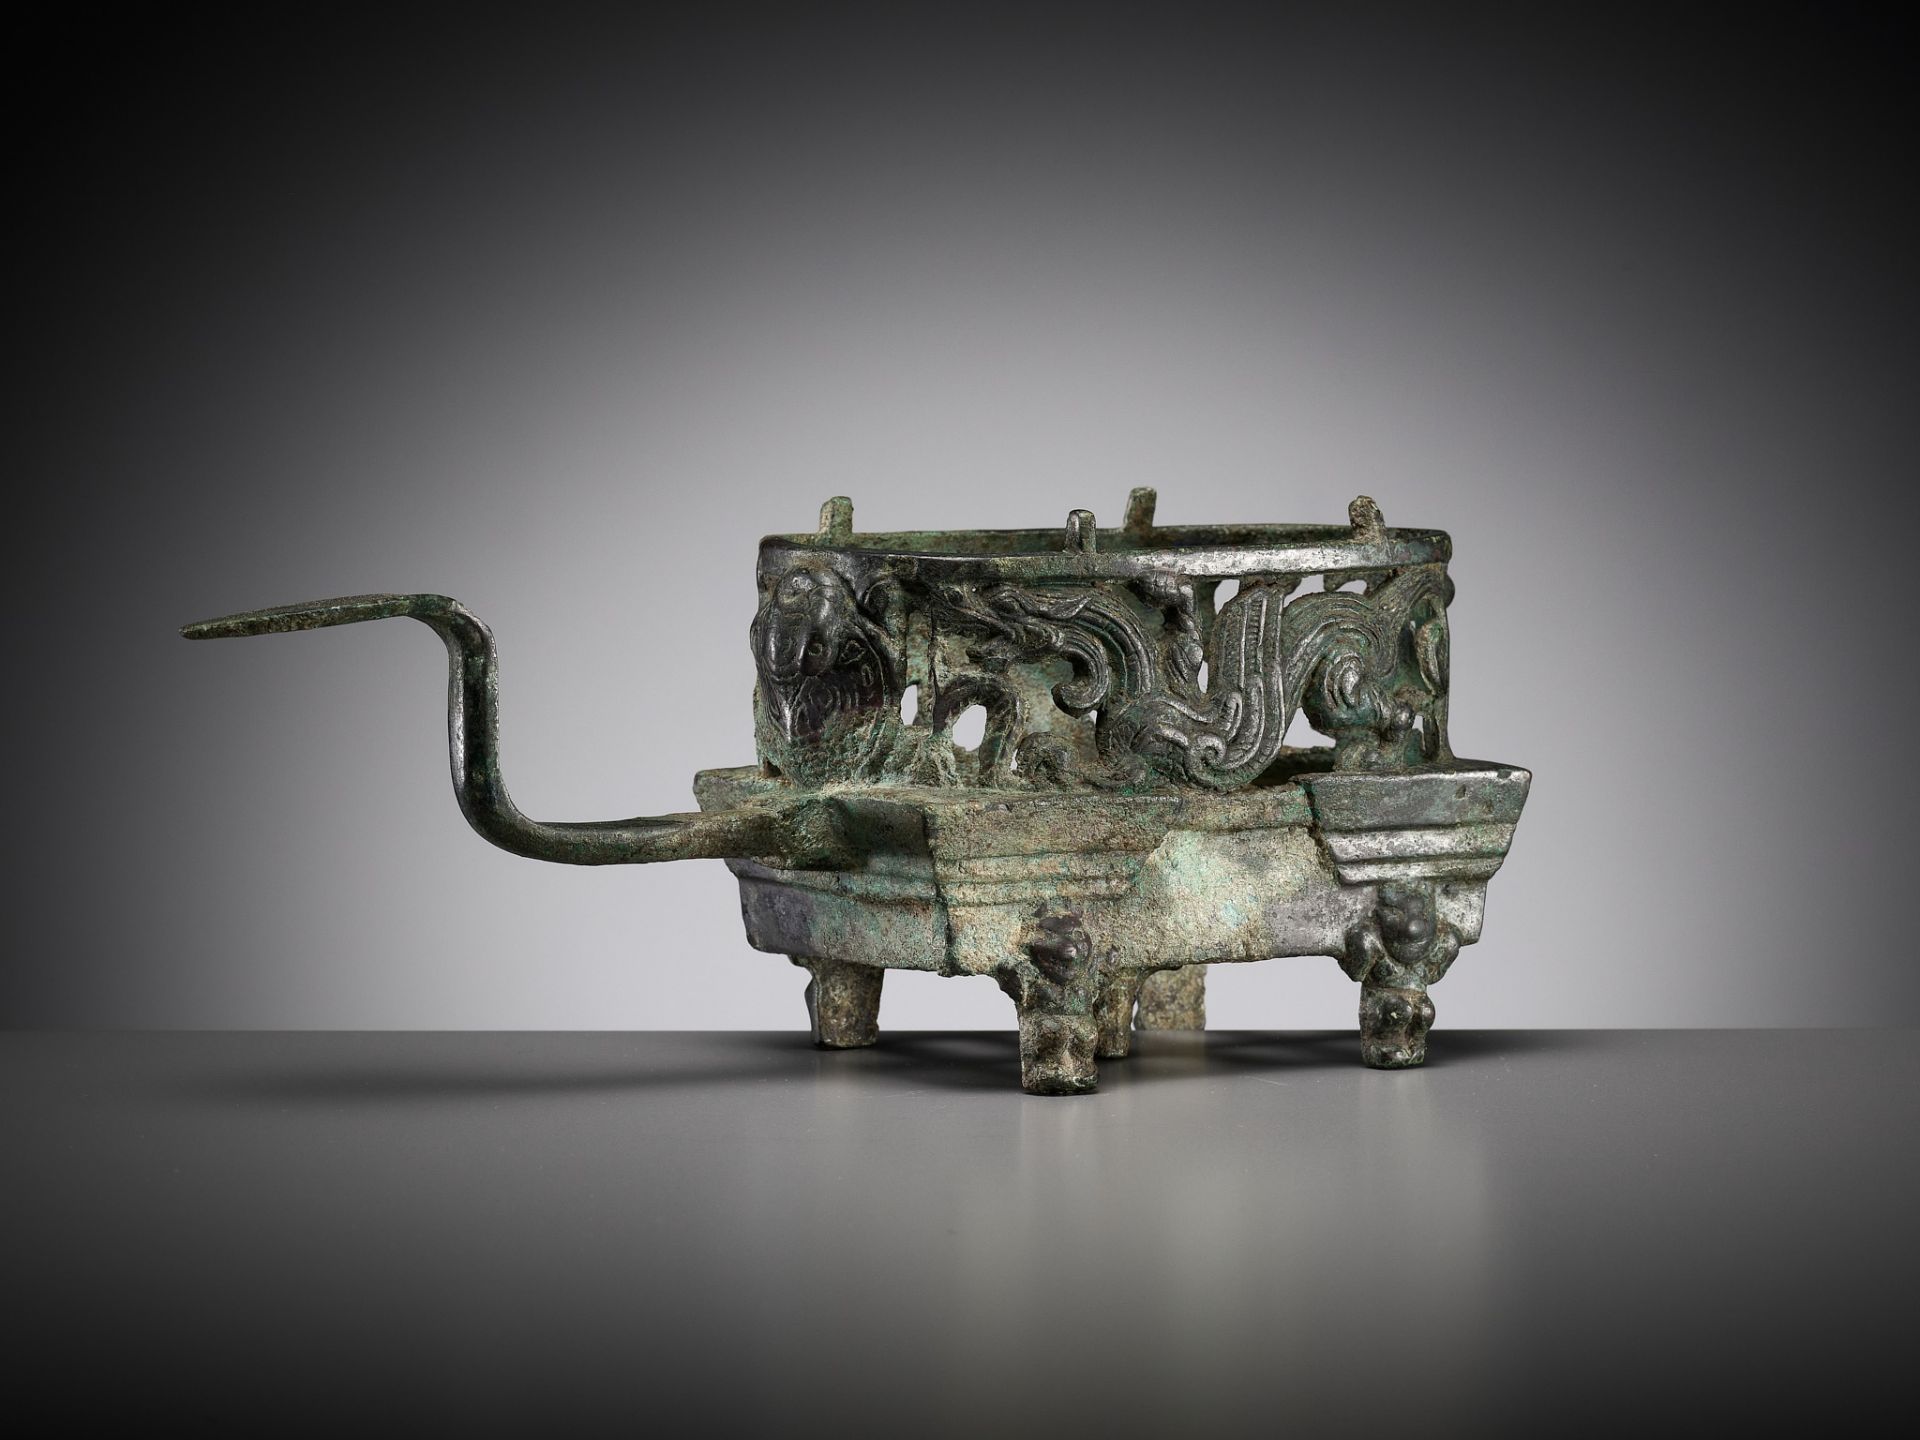 A 'FOUR AUSPICIOUS BEASTS' (SI XIANG) BRONZE BRAZIER, HAN DYNASTY, CHINA, 206 BC-220 AD - Image 16 of 16